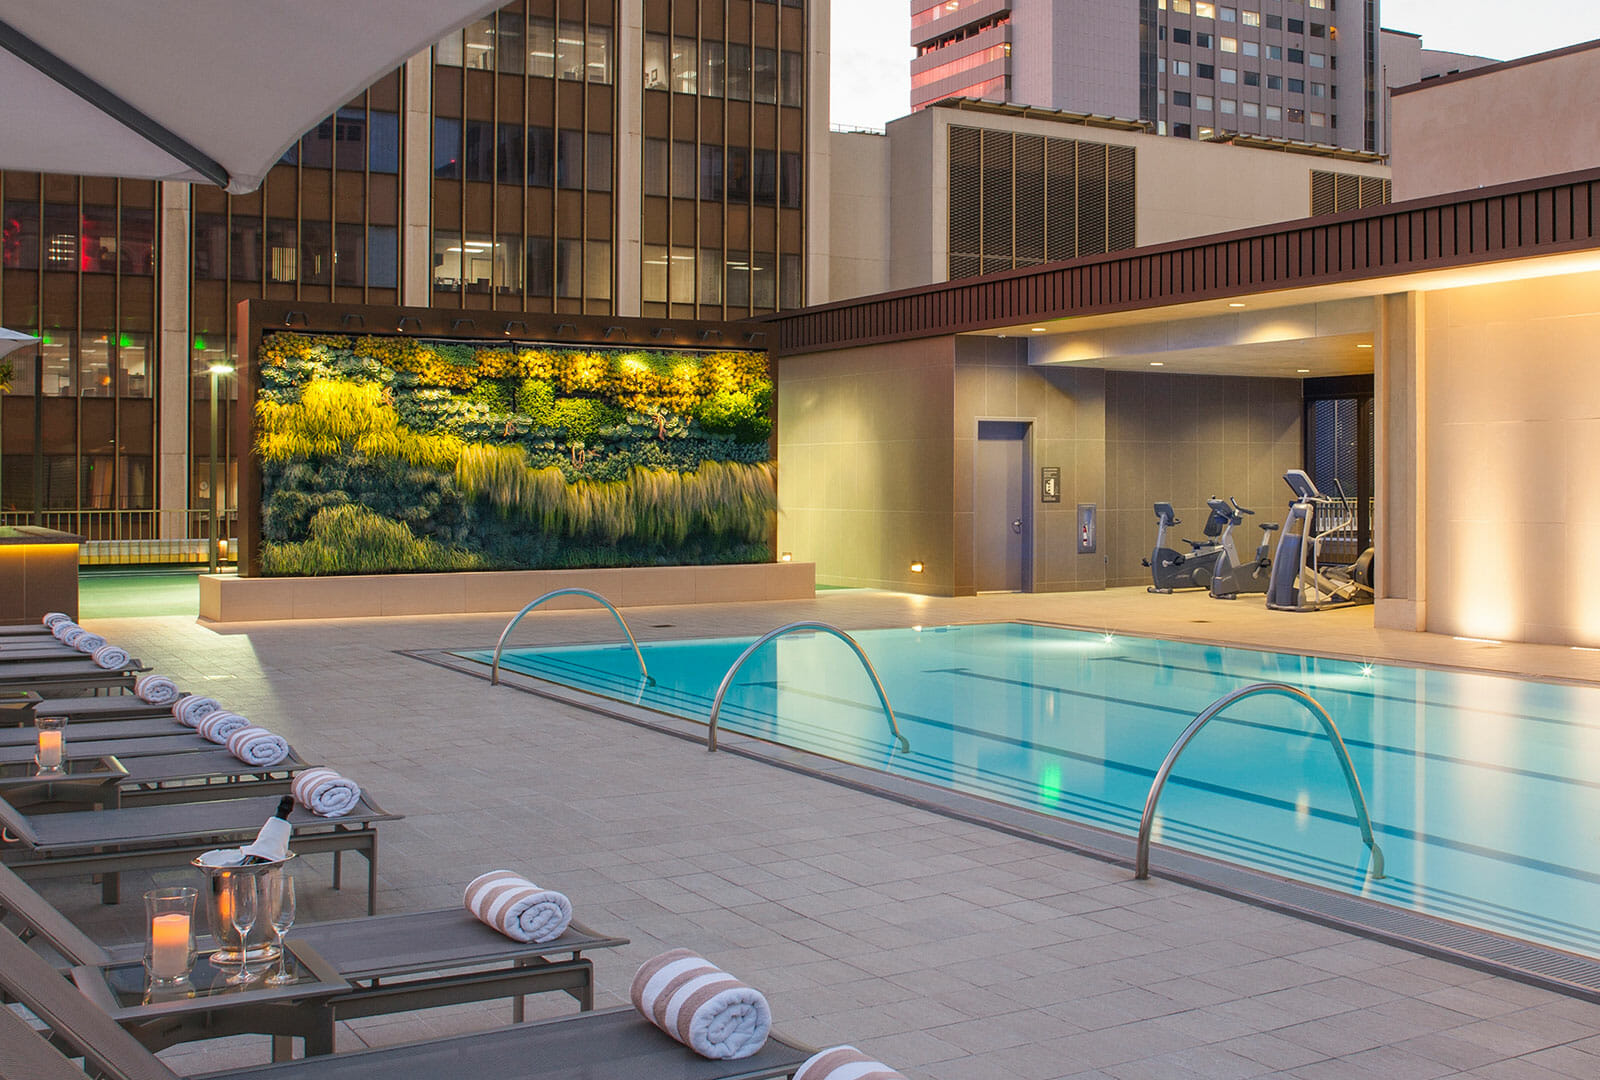 Westgate Hotel rooftop pool with lounge chairs and fitness equipment